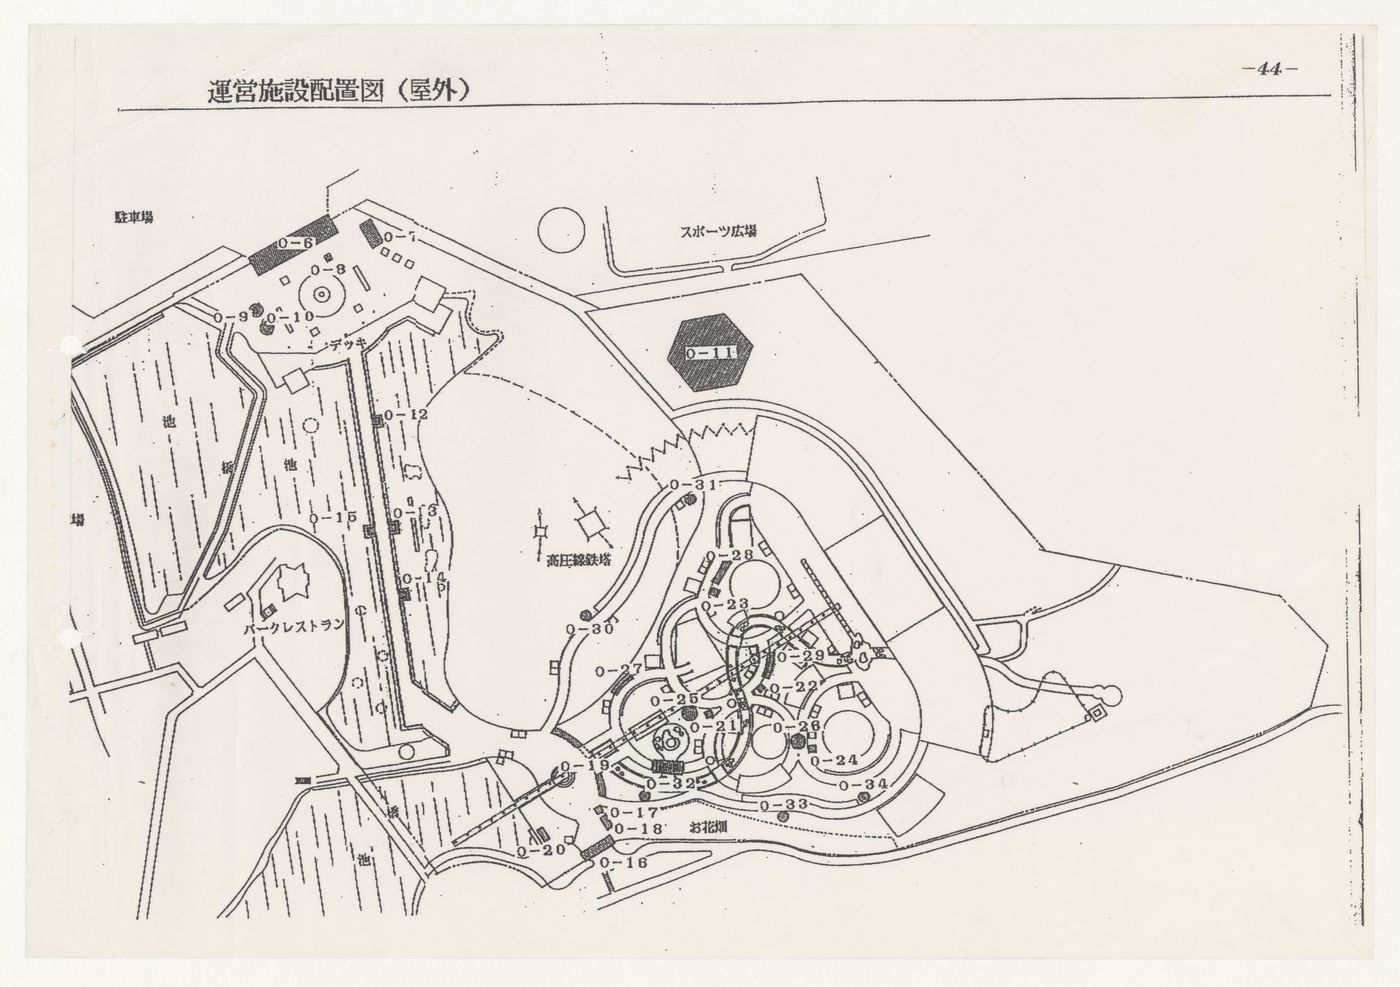 Document related to 1st Japan Expo Toyama from the project file "Prospecta Toyama '92 Observatory Tower, Imizu, Japan"